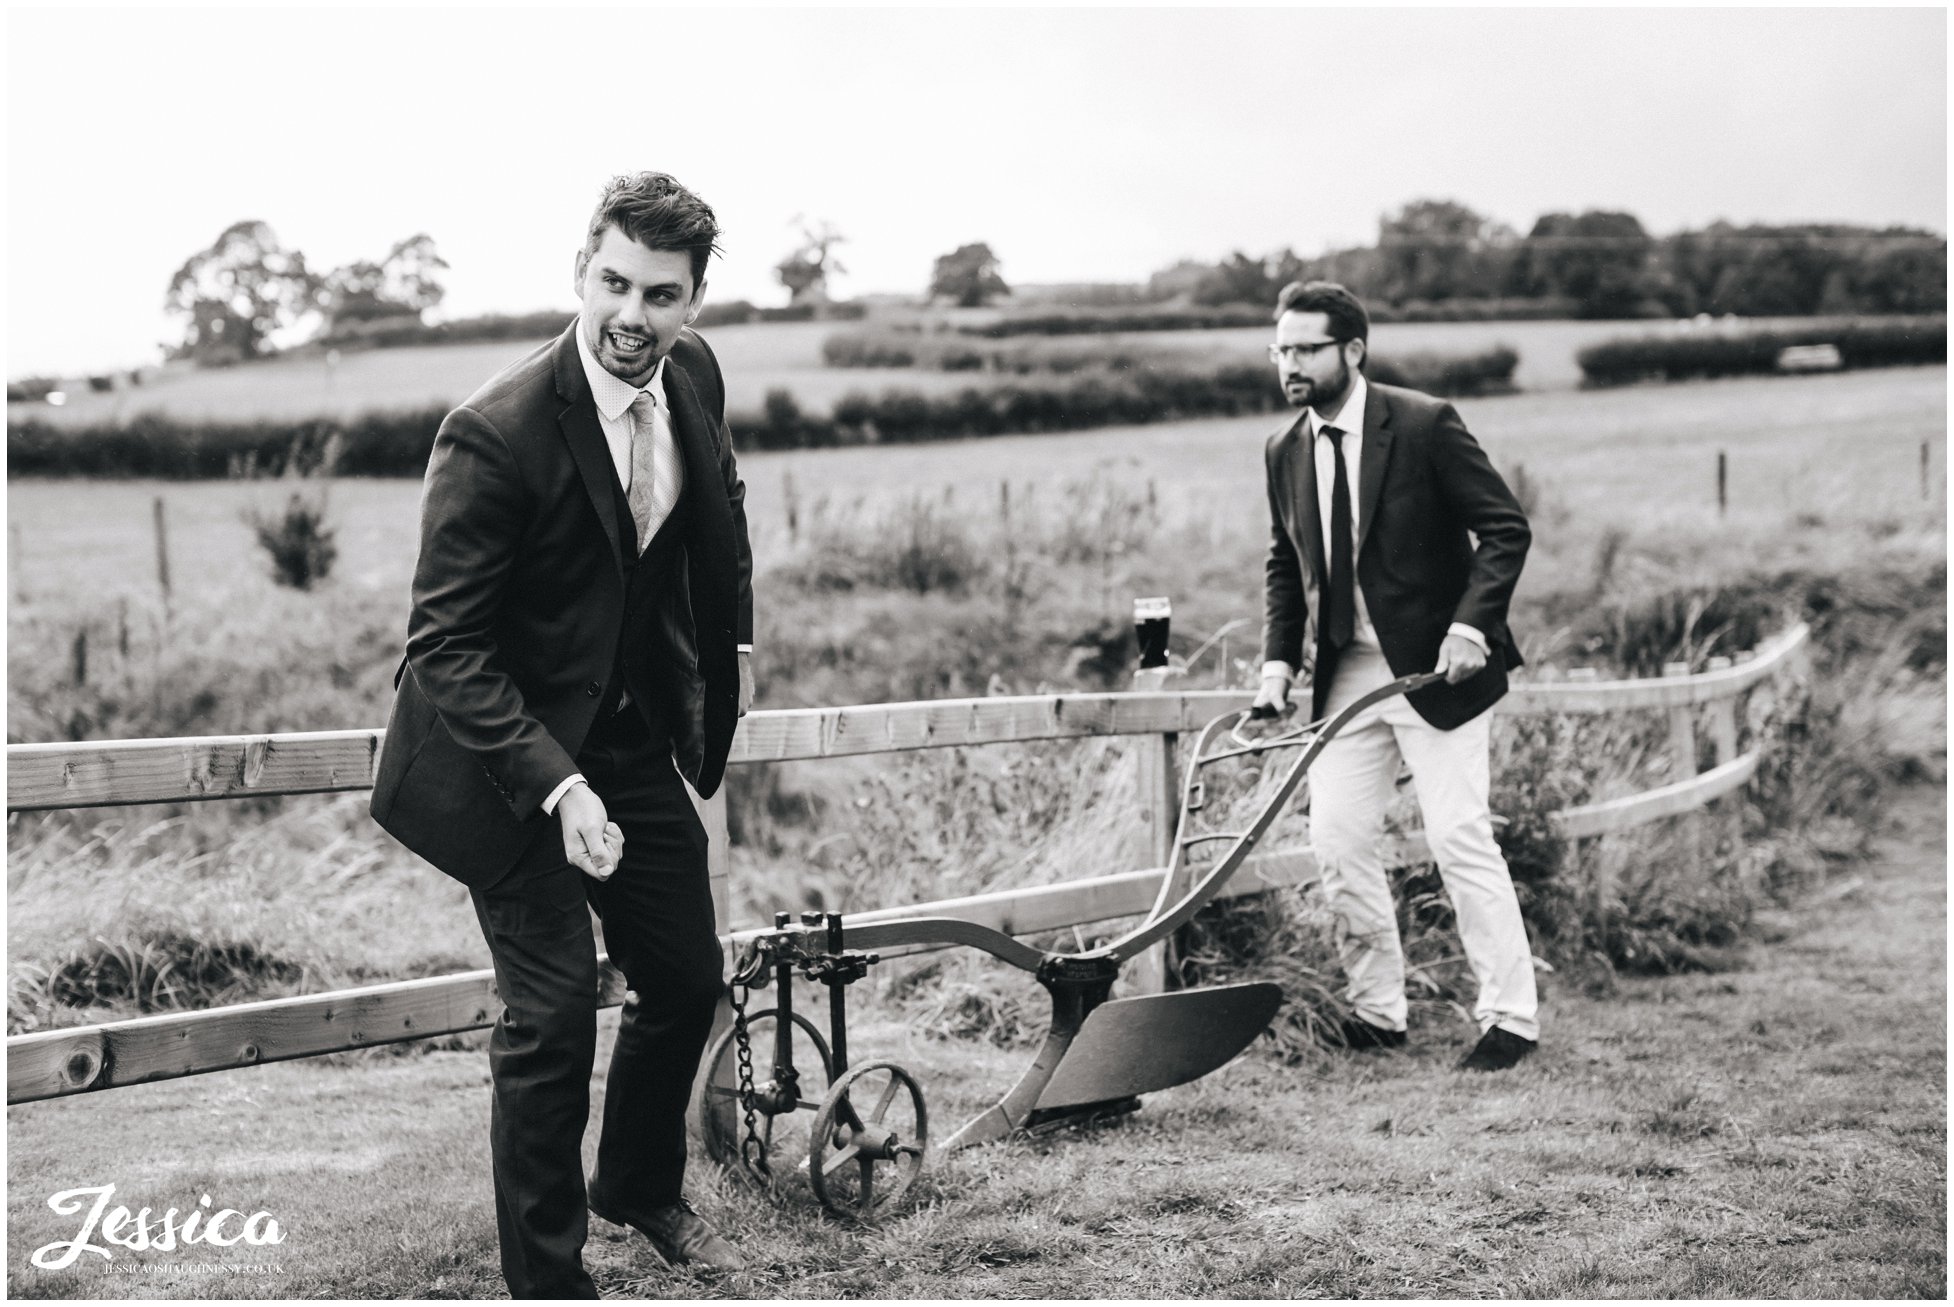 guests joke with farming equipment at tower hill barns wedding venue 